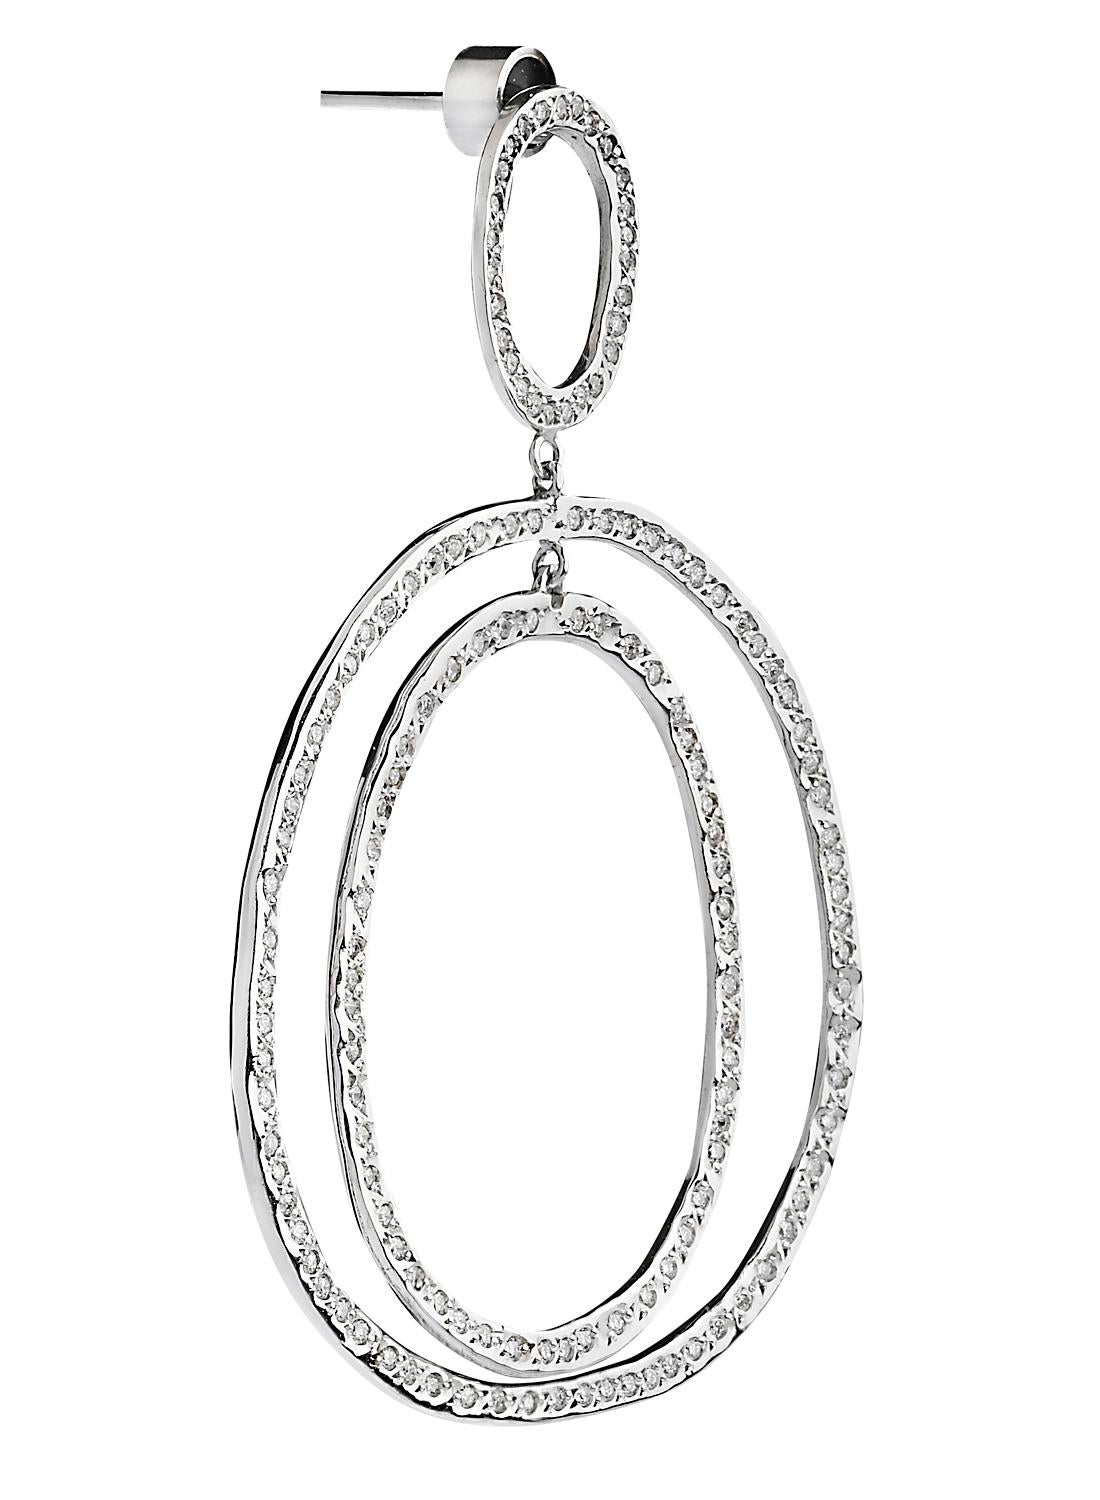 Ileana Makri's Best-Selling Diamond Double hoop Again earrings are handcrafted from 18-karat polished white gold and set with 1.98-carats of pavé white diamonds with a post back for pierced ears. Ileana Makri's Again Collection centers its design